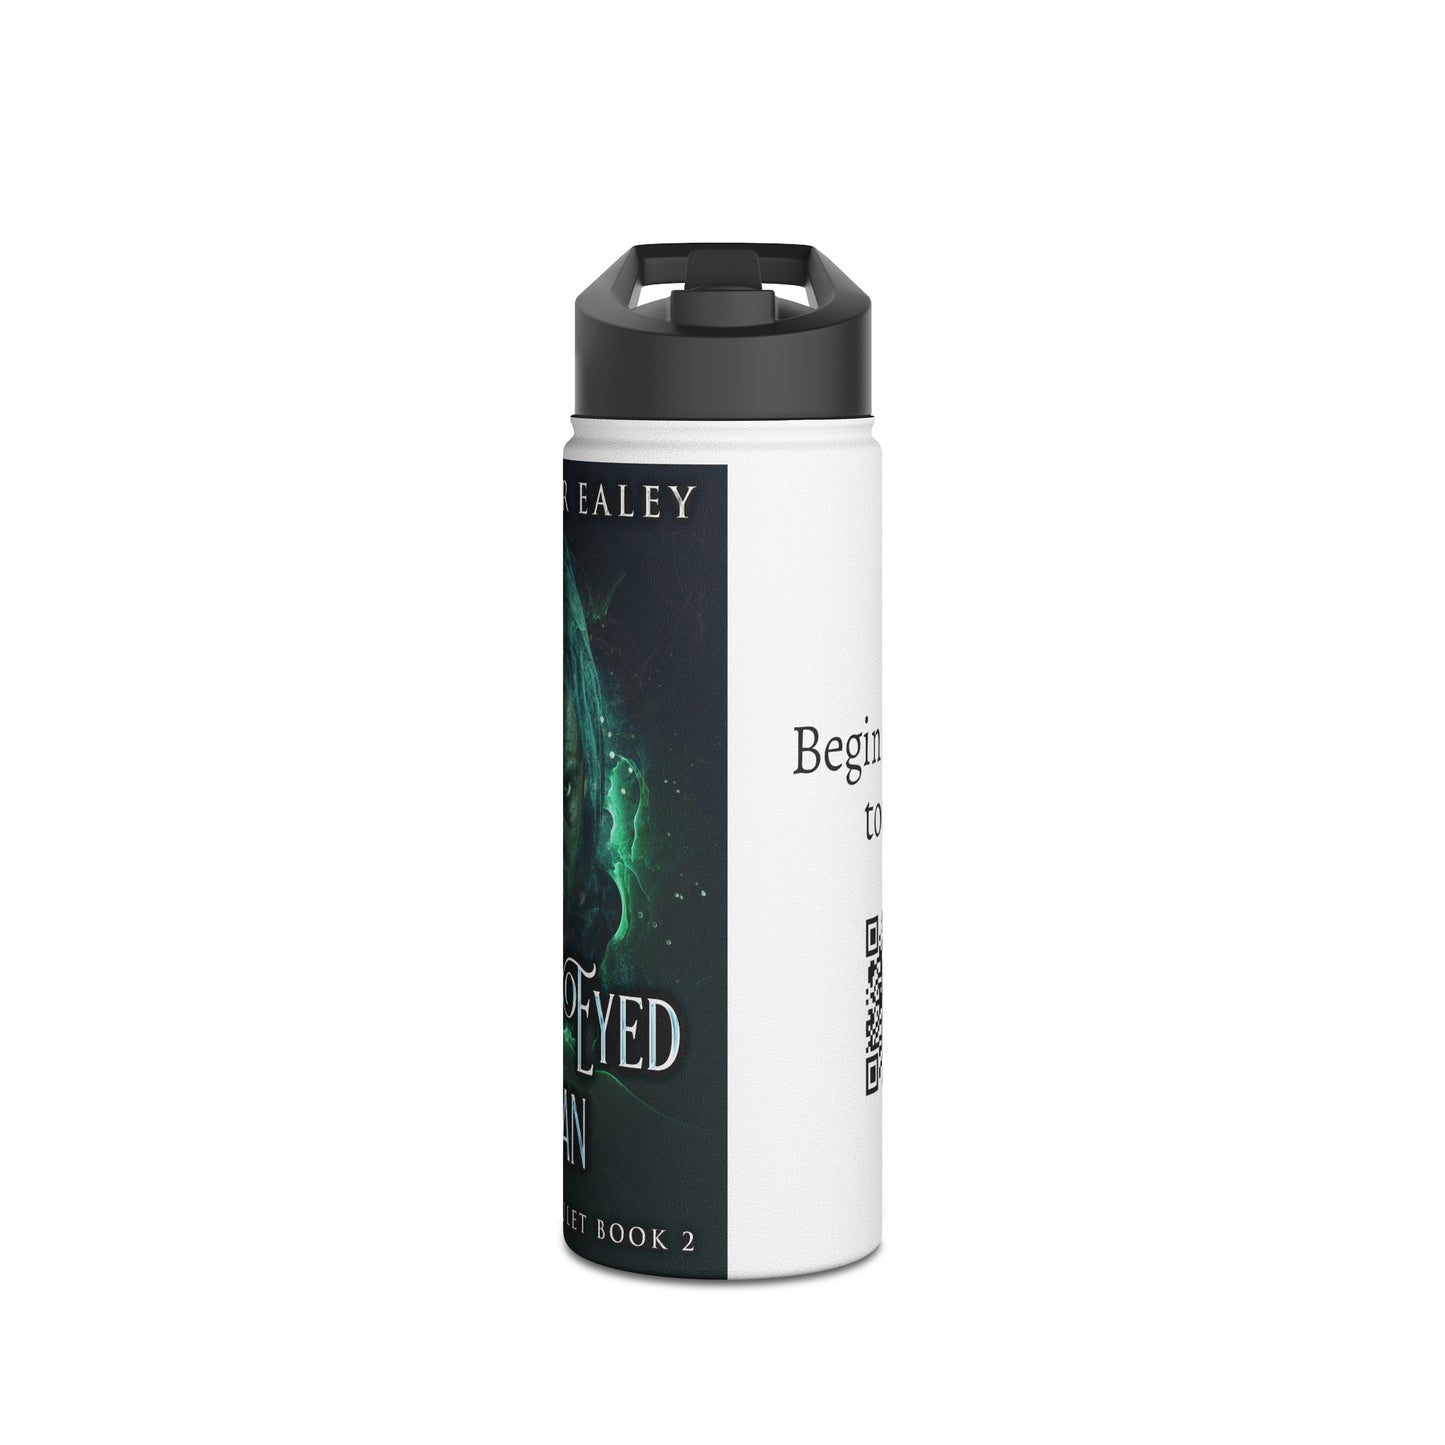 The Green-Eyed Man - Stainless Steel Water Bottle